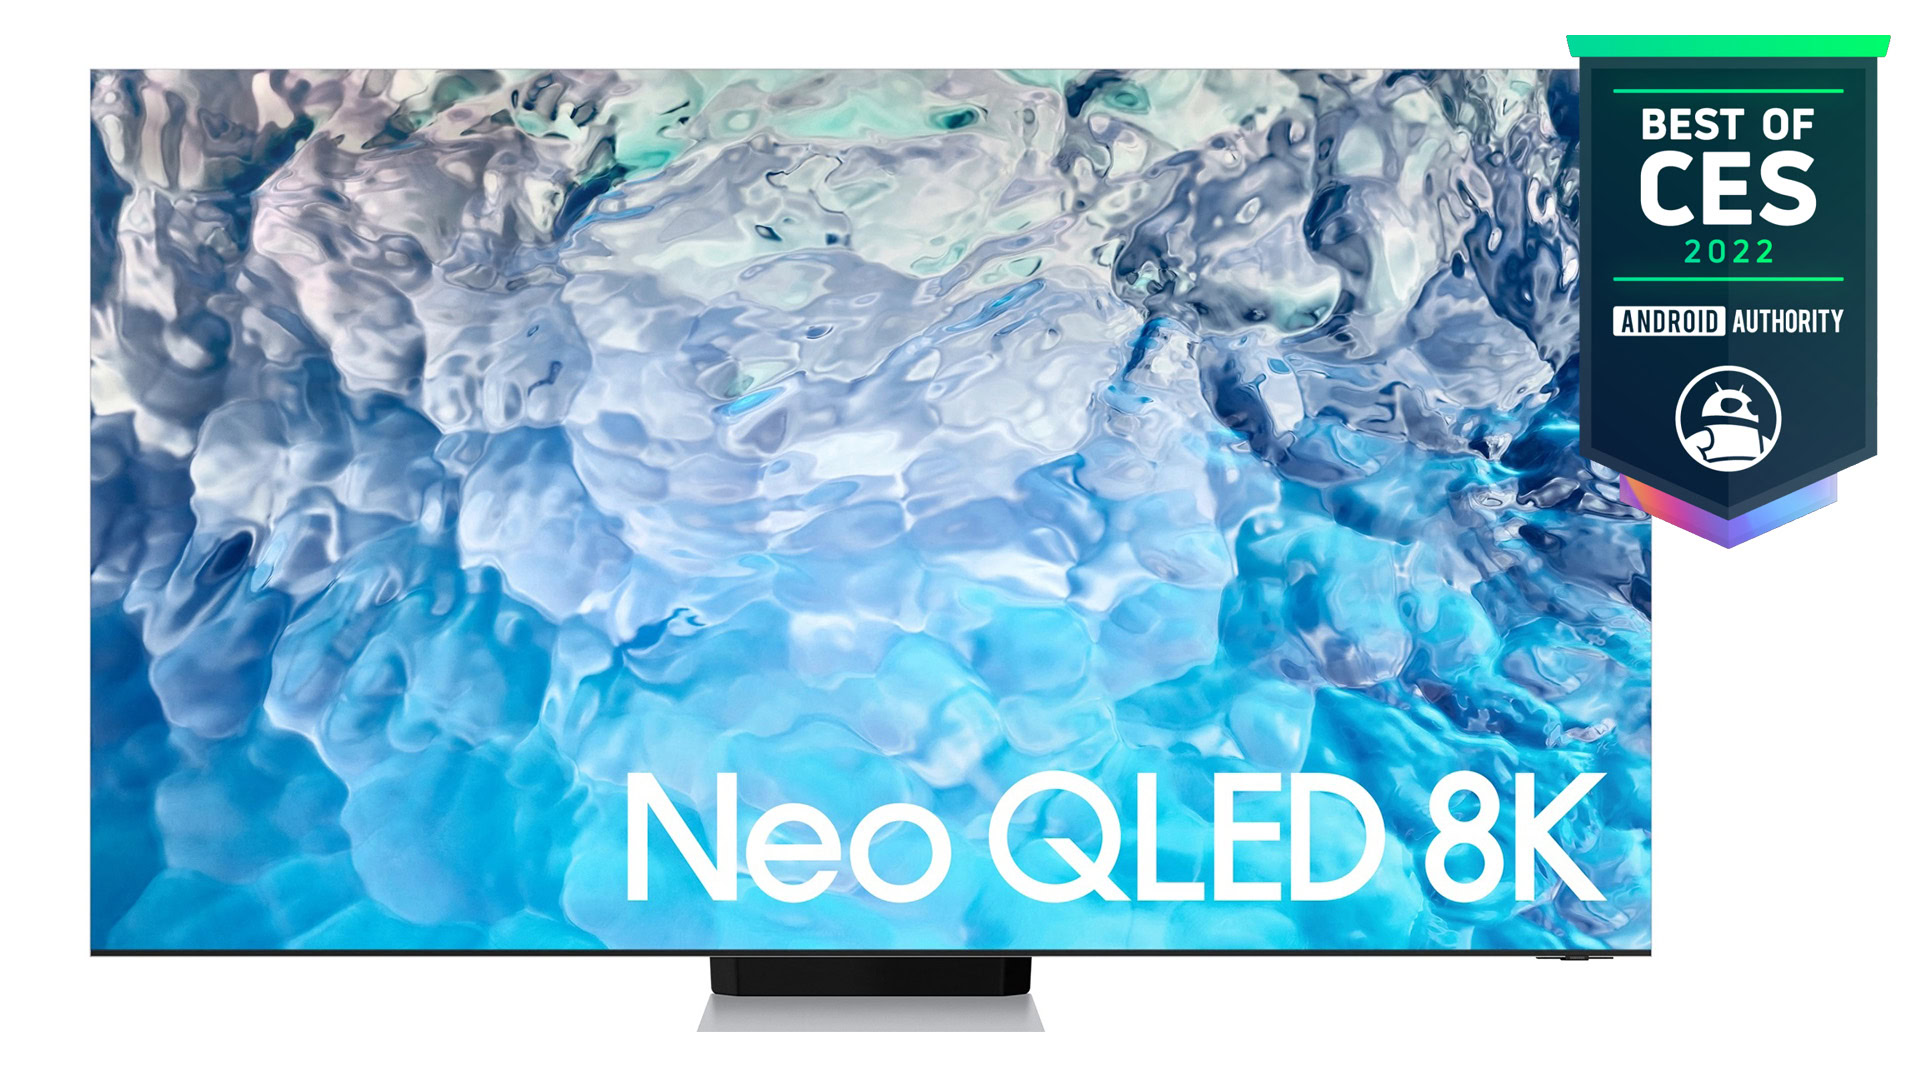 Samsung Neo QLED QN900B 8K Android Authority Best of CES 2022 Award winner